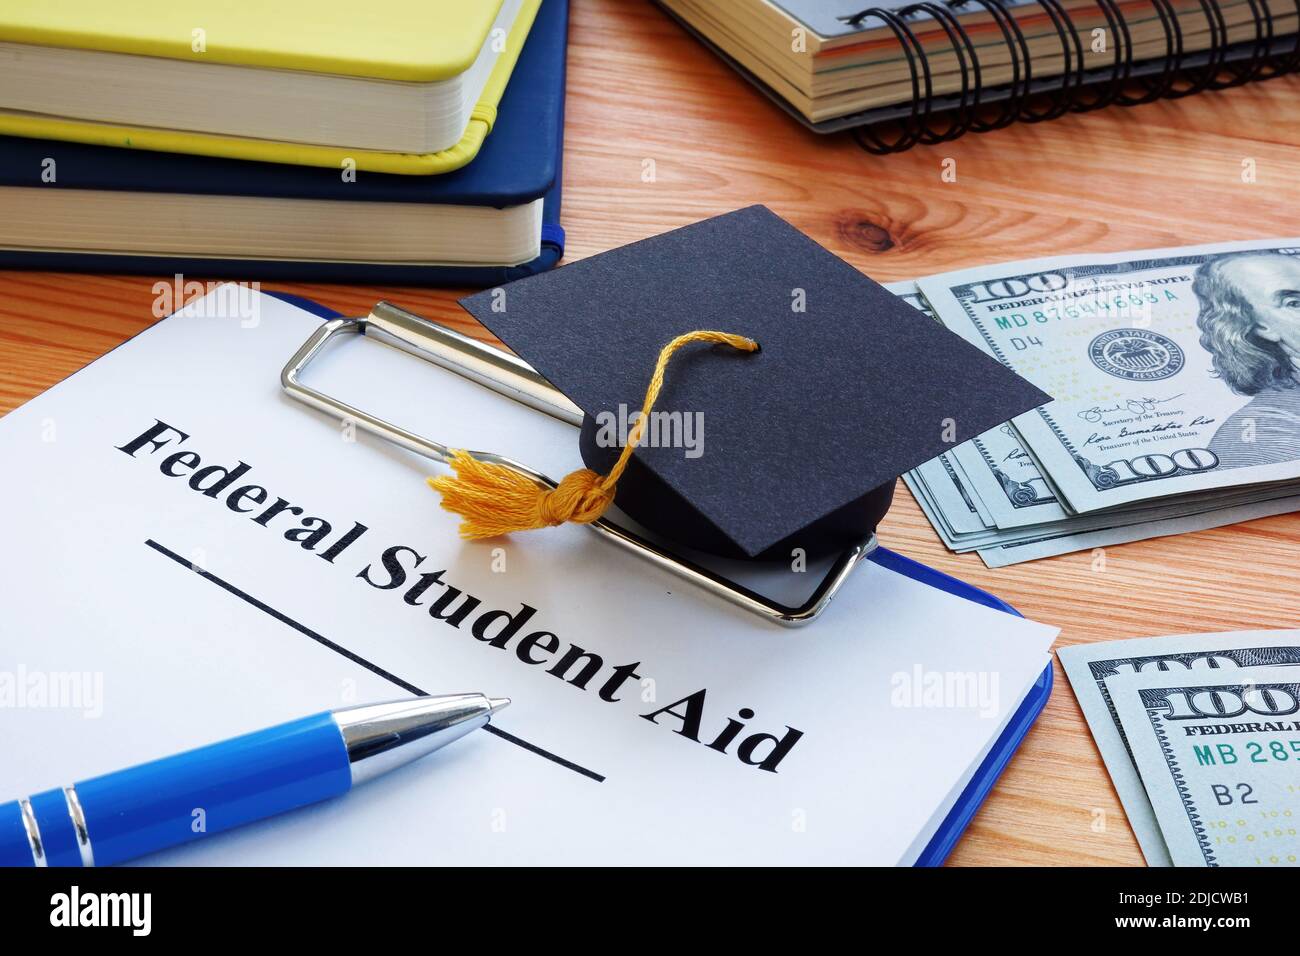 Federal student aid and small Square academic cap. Stock Photo